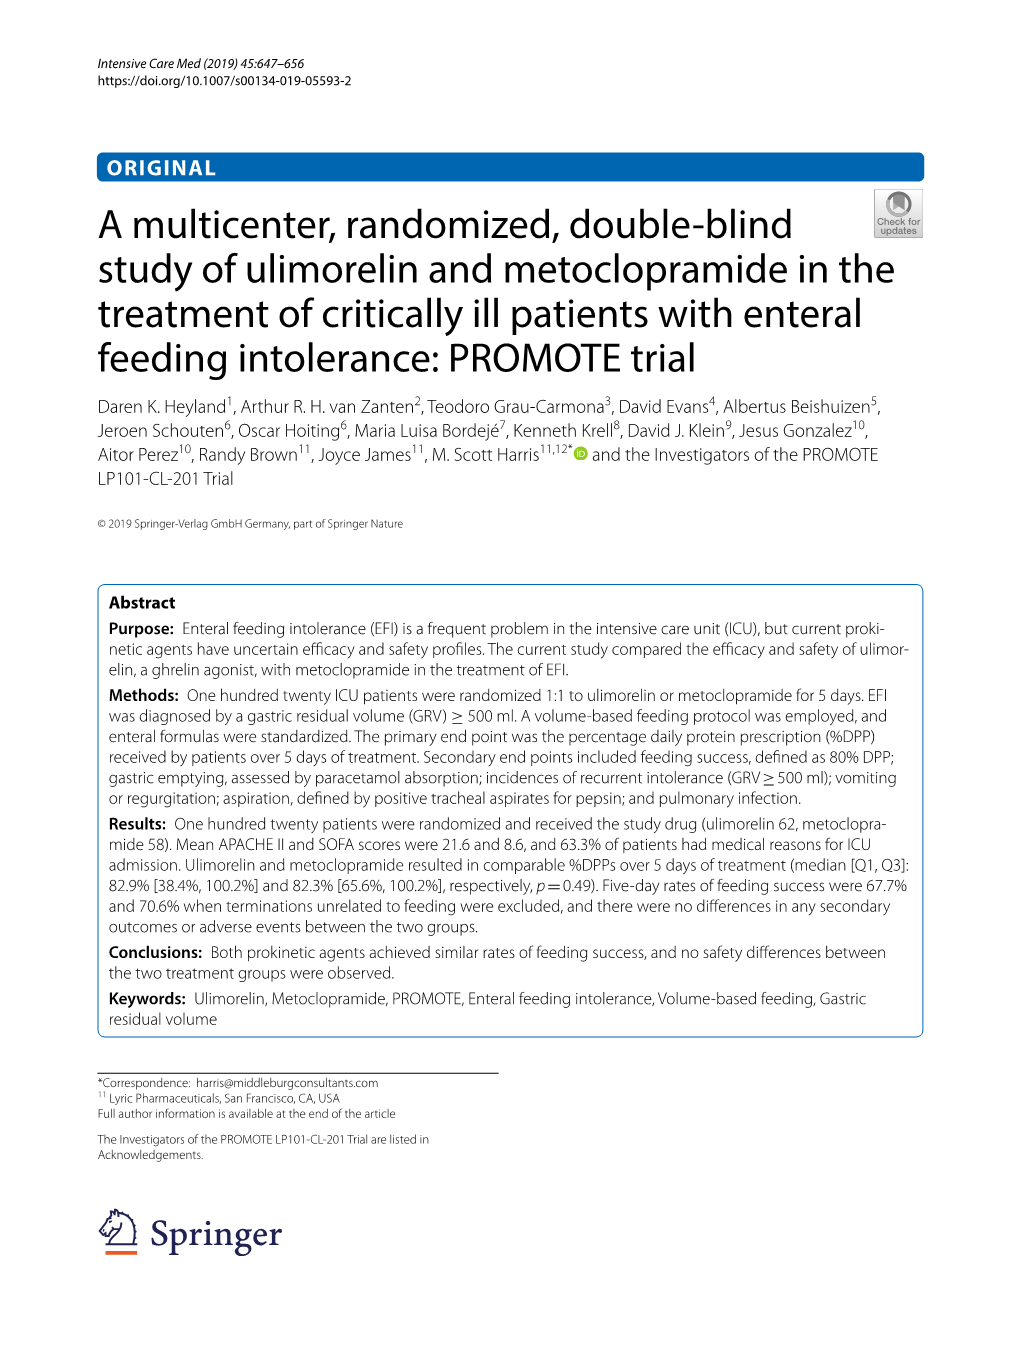 A Multicenter, Randomized, Double-Blind Study of Ulimorelin And